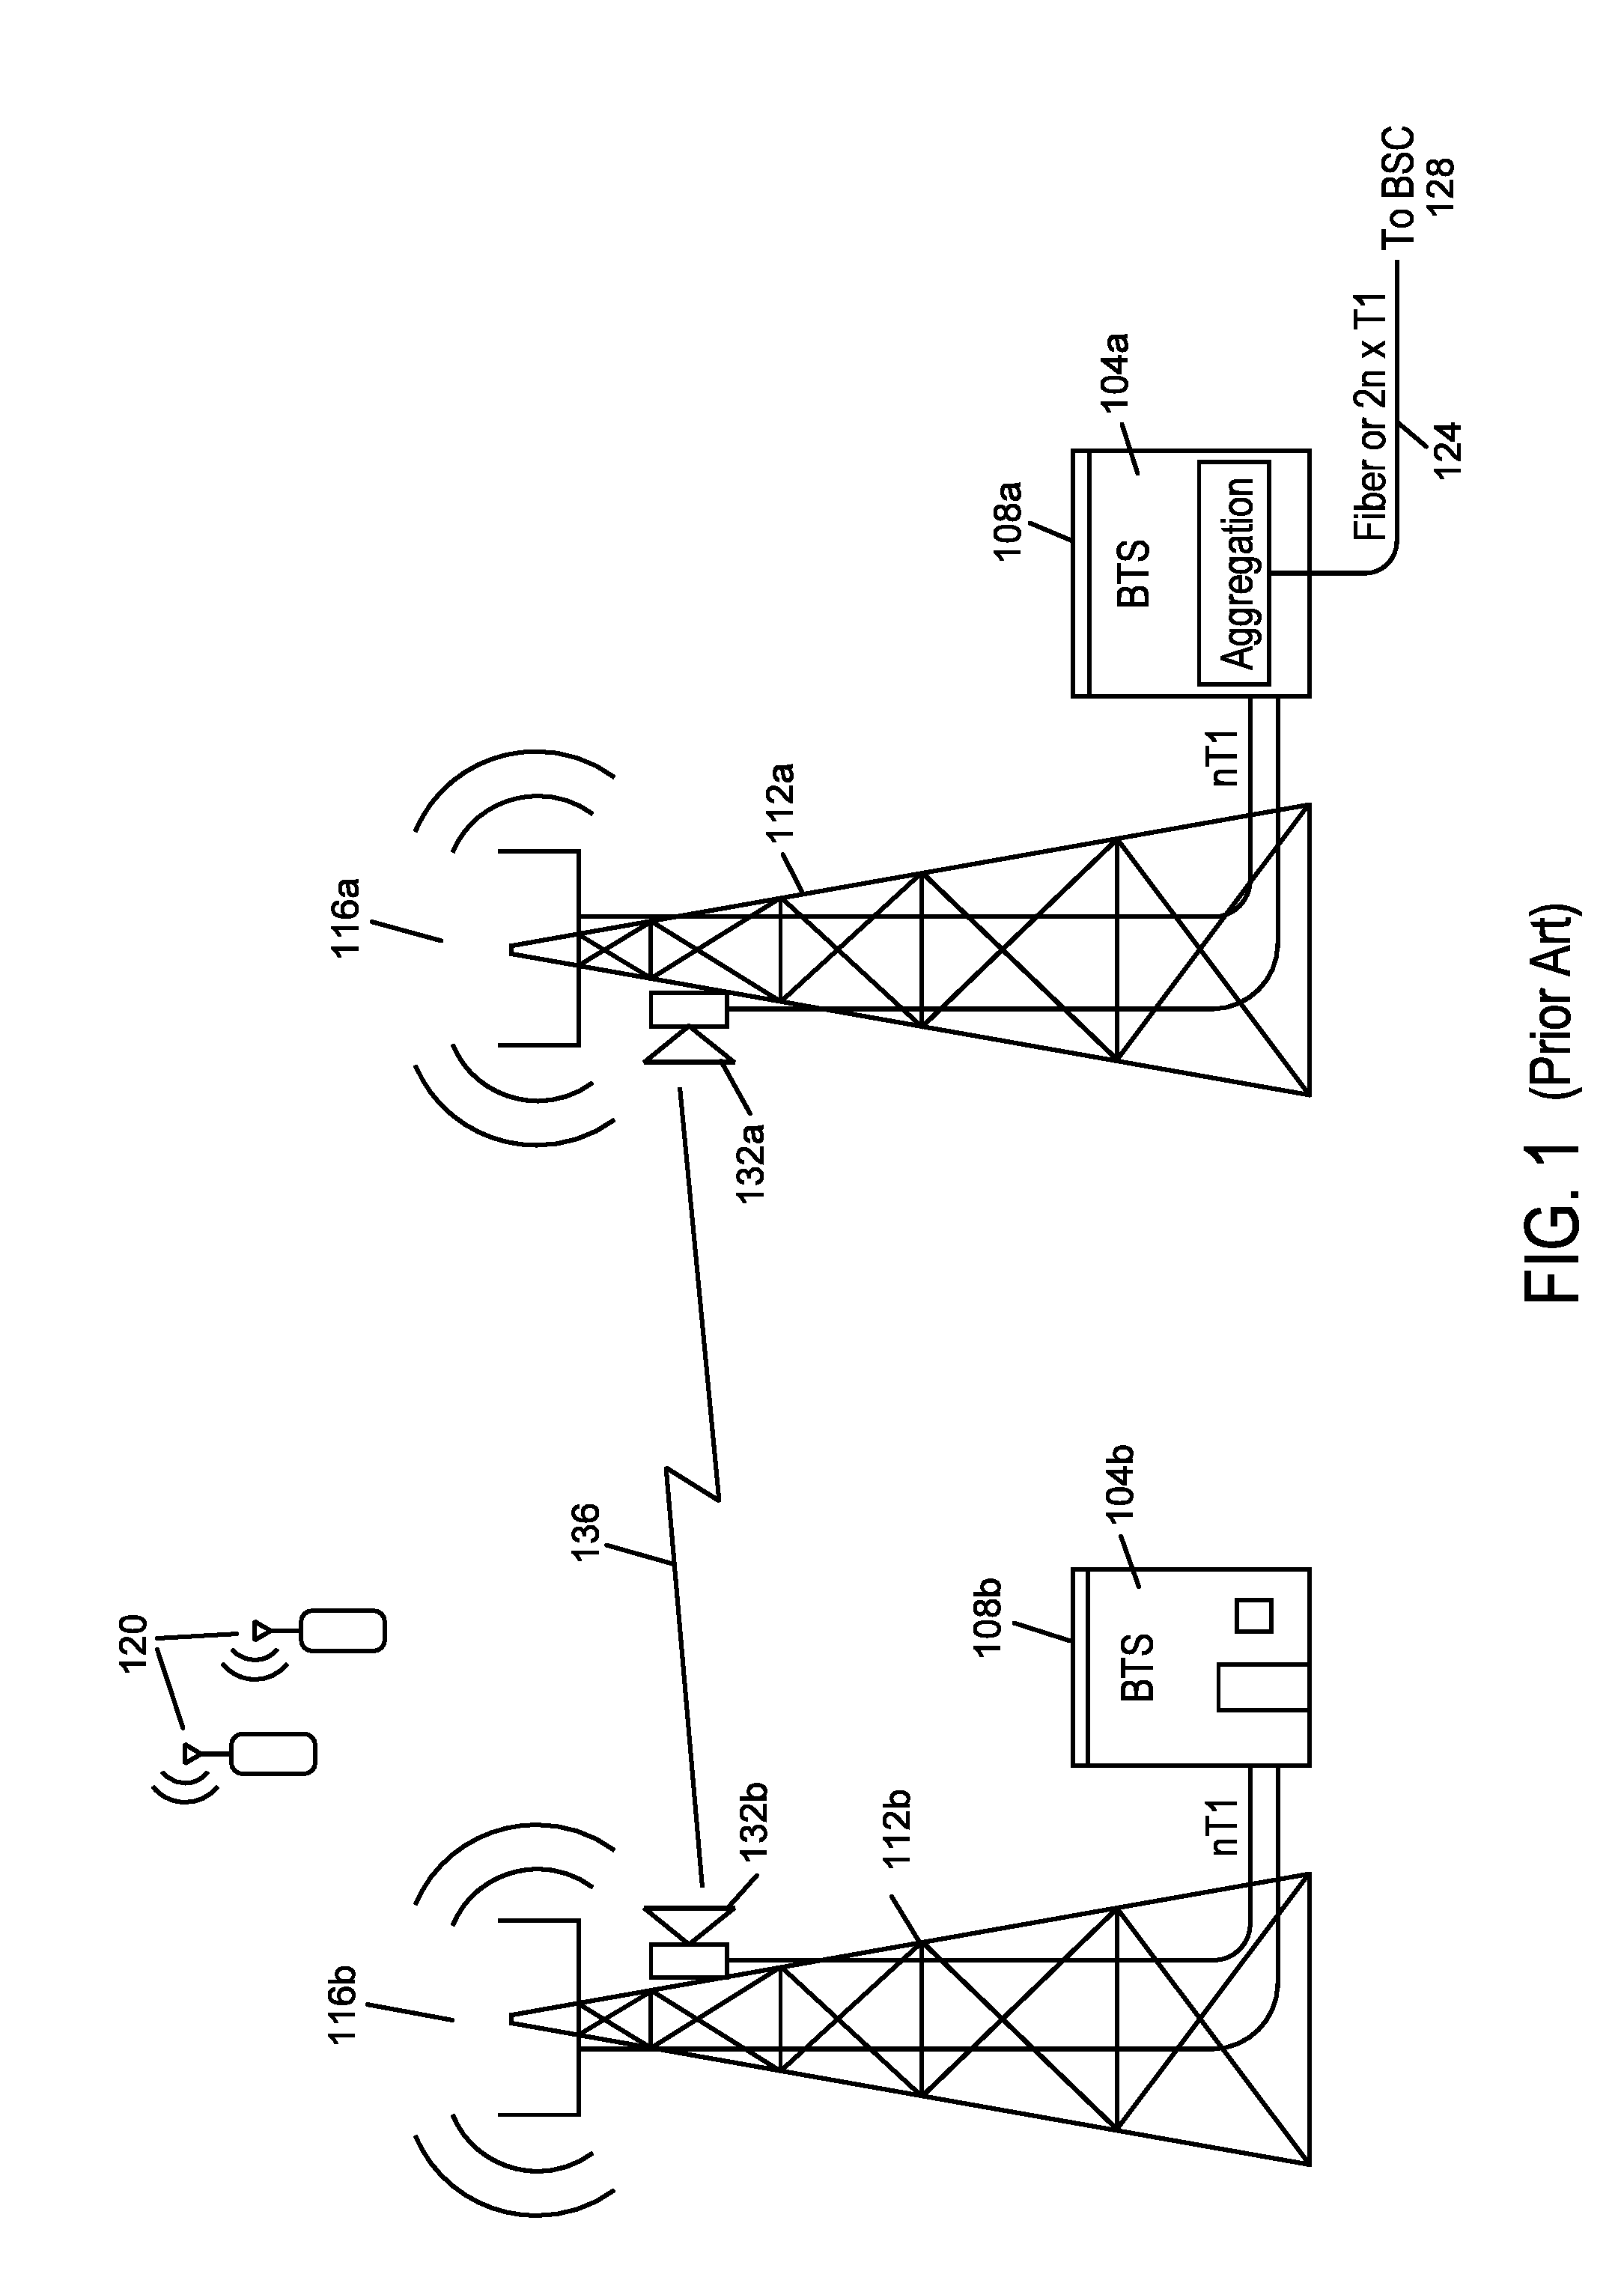 Backhaul radio with a substrate tab-fed antenna assembly